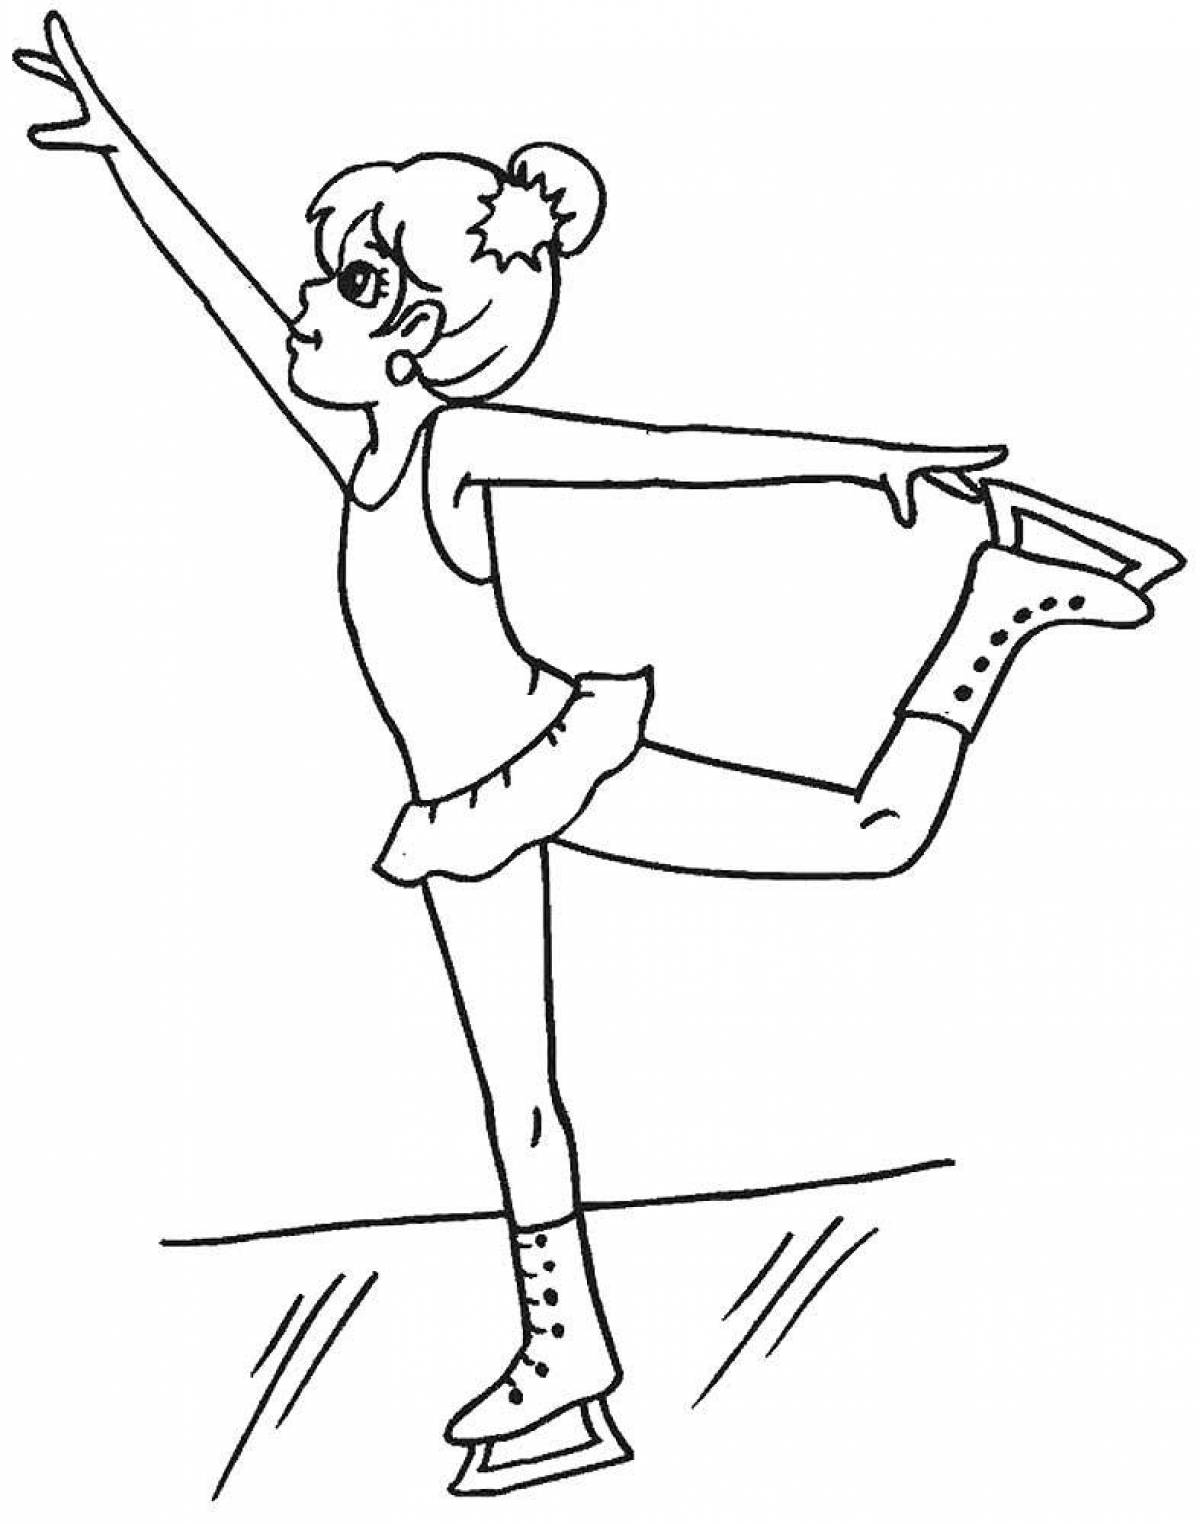 Glorious figure skating coloring page